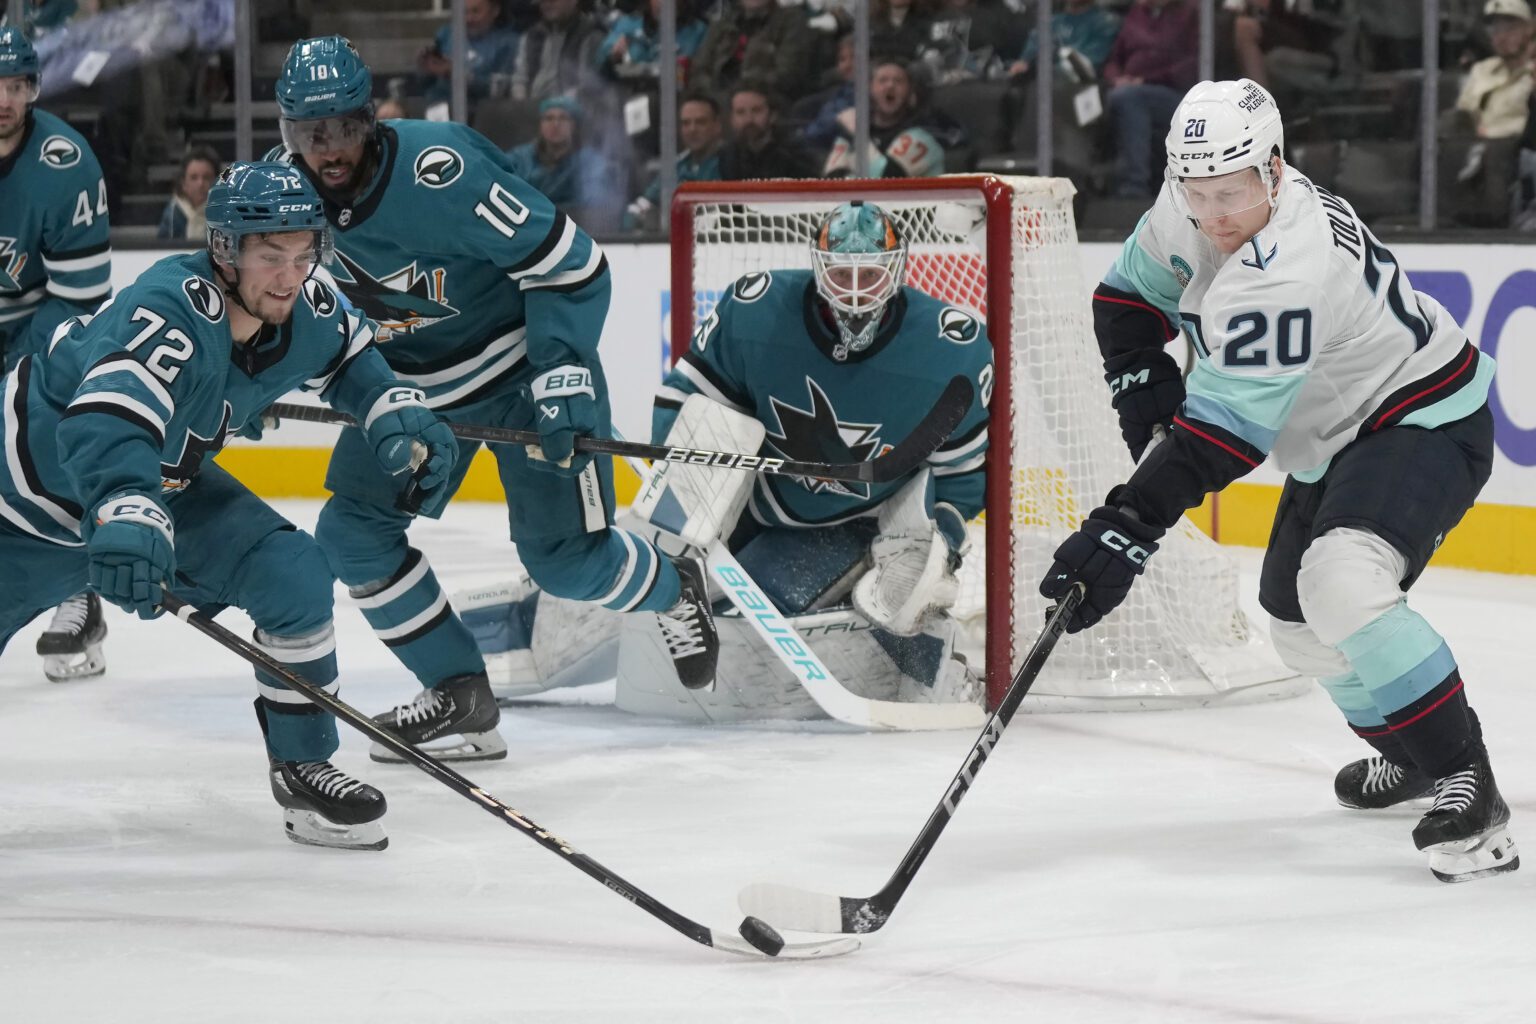 San Jose Sharks left wing William Eklund (72) reaches for the puck against Seattle Kraken right wing Eeli Tolvanen (20) with teammates behind them to help defend the goal.